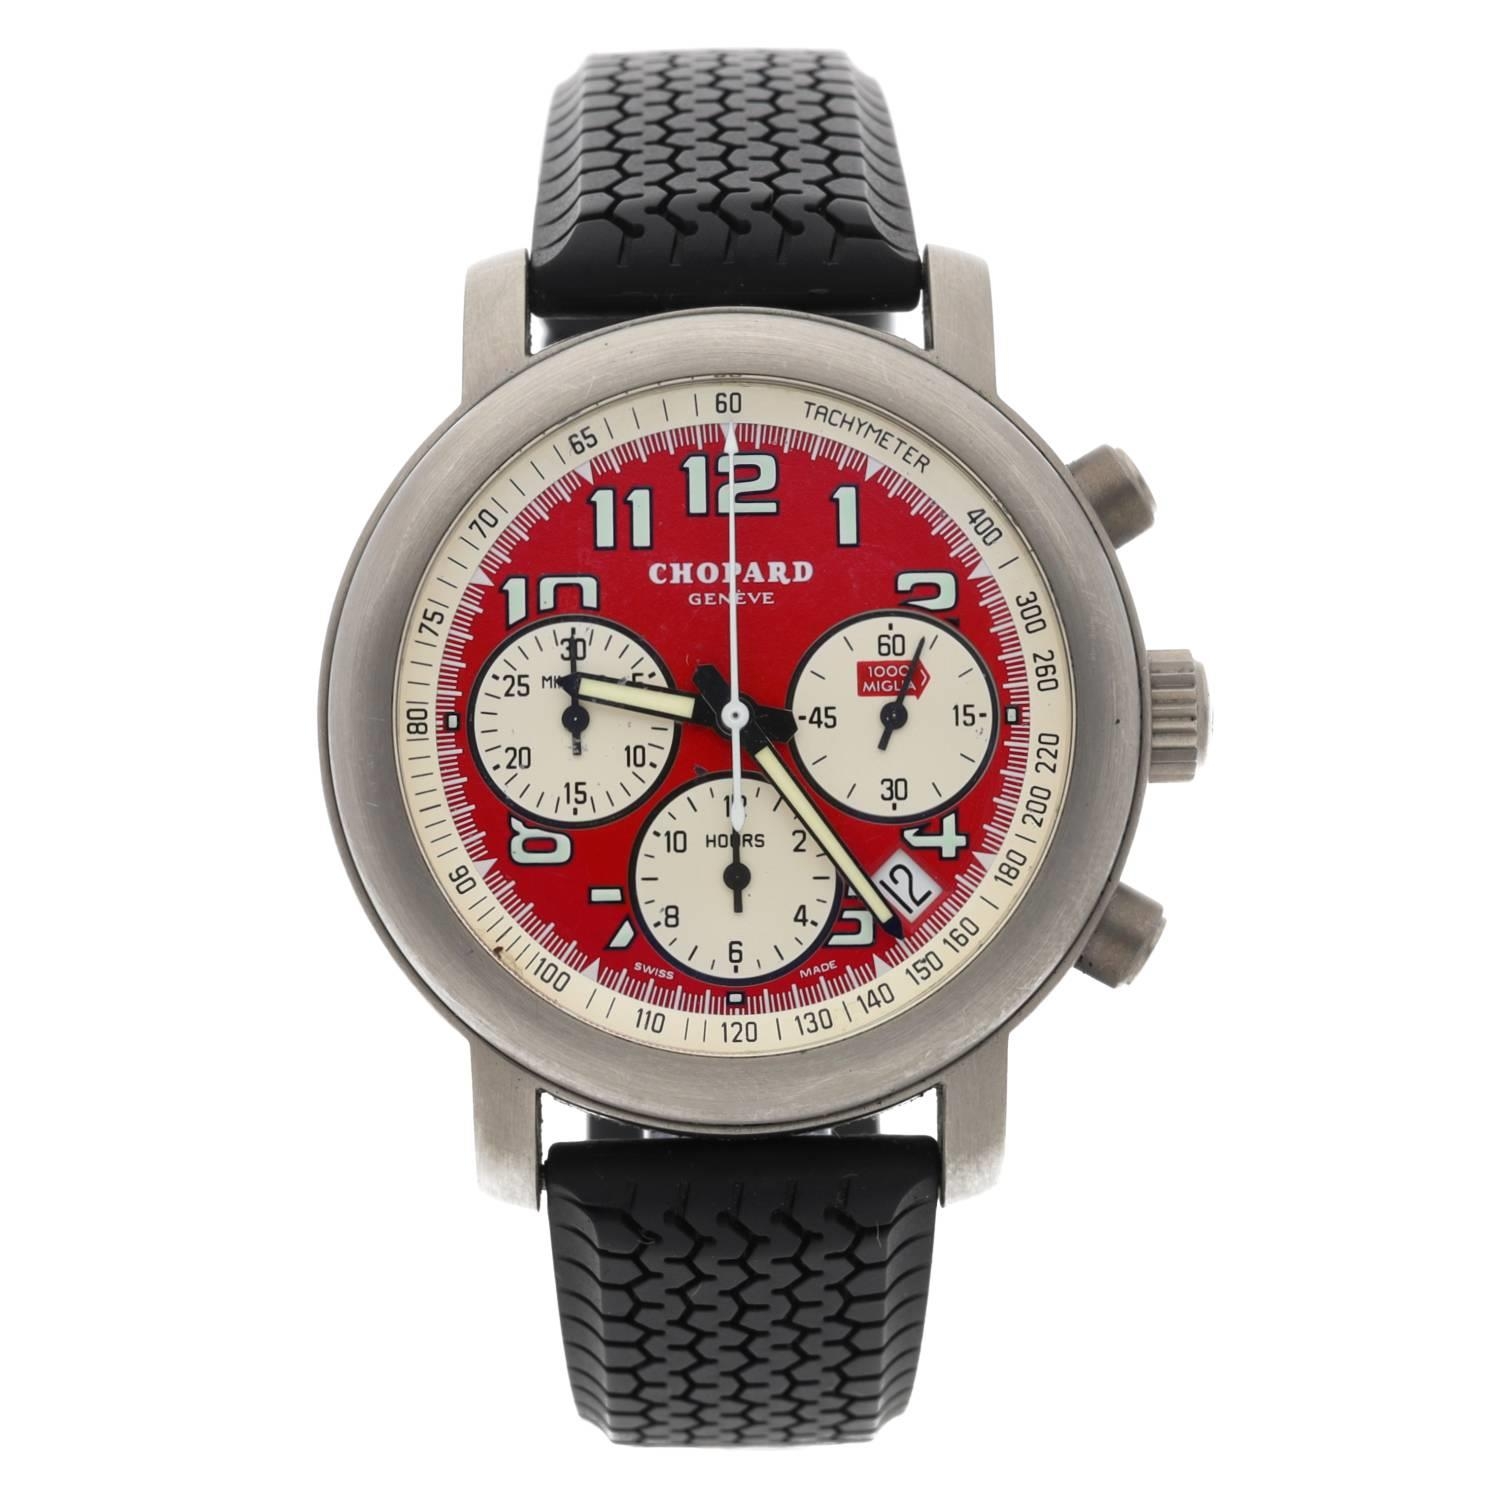 Chopard Mille Miglia MM Rosso Limited Edition Chronograph automatic titanium gentleman's wristwatch,